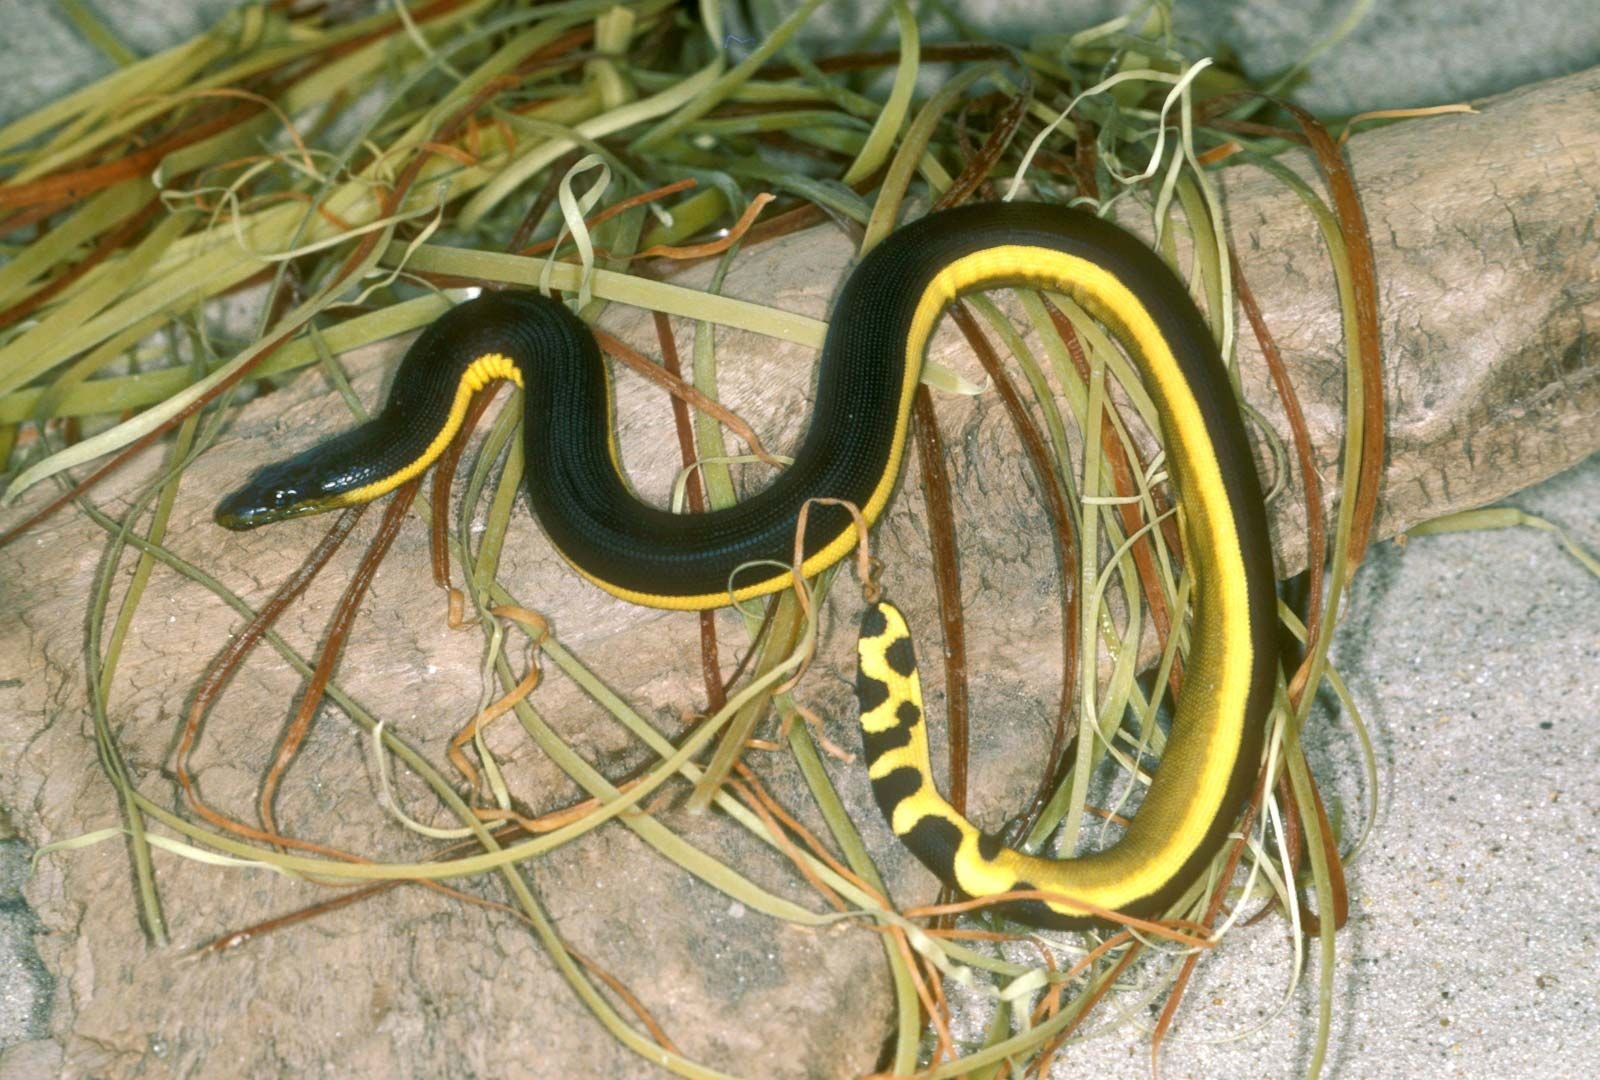 Black Snakes With Yellow Belly